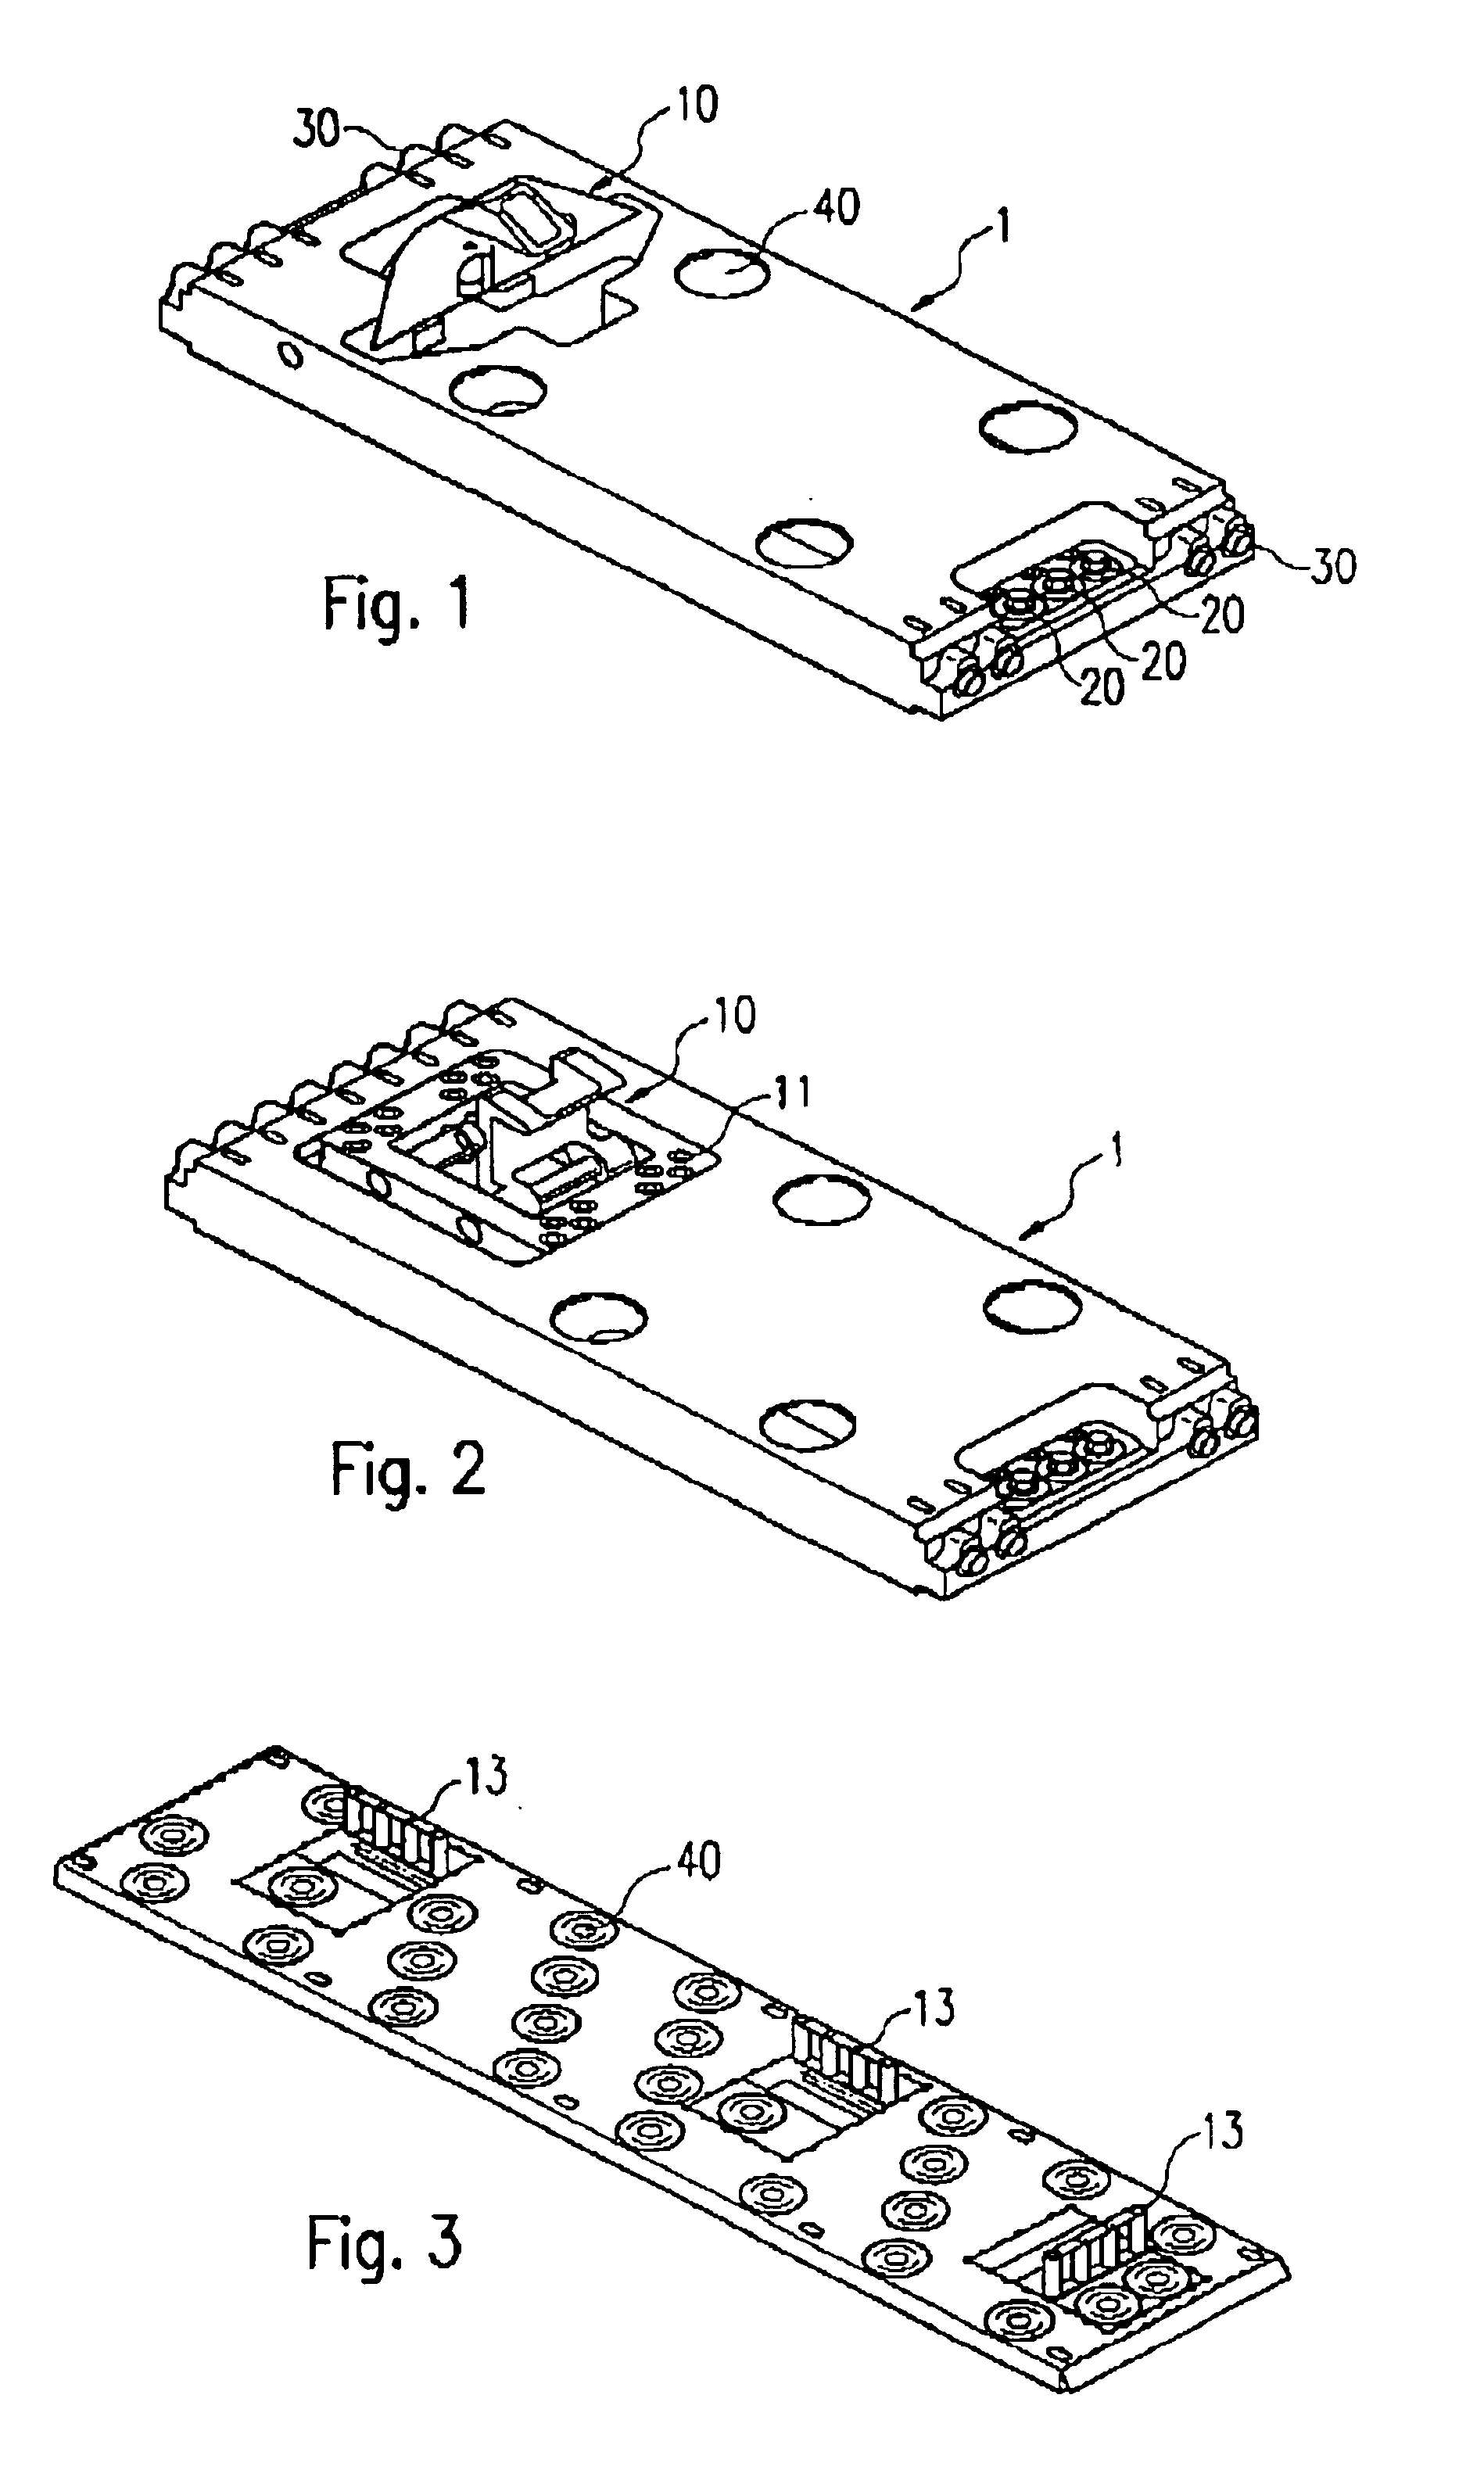 Mounting apparatus for a transportation system